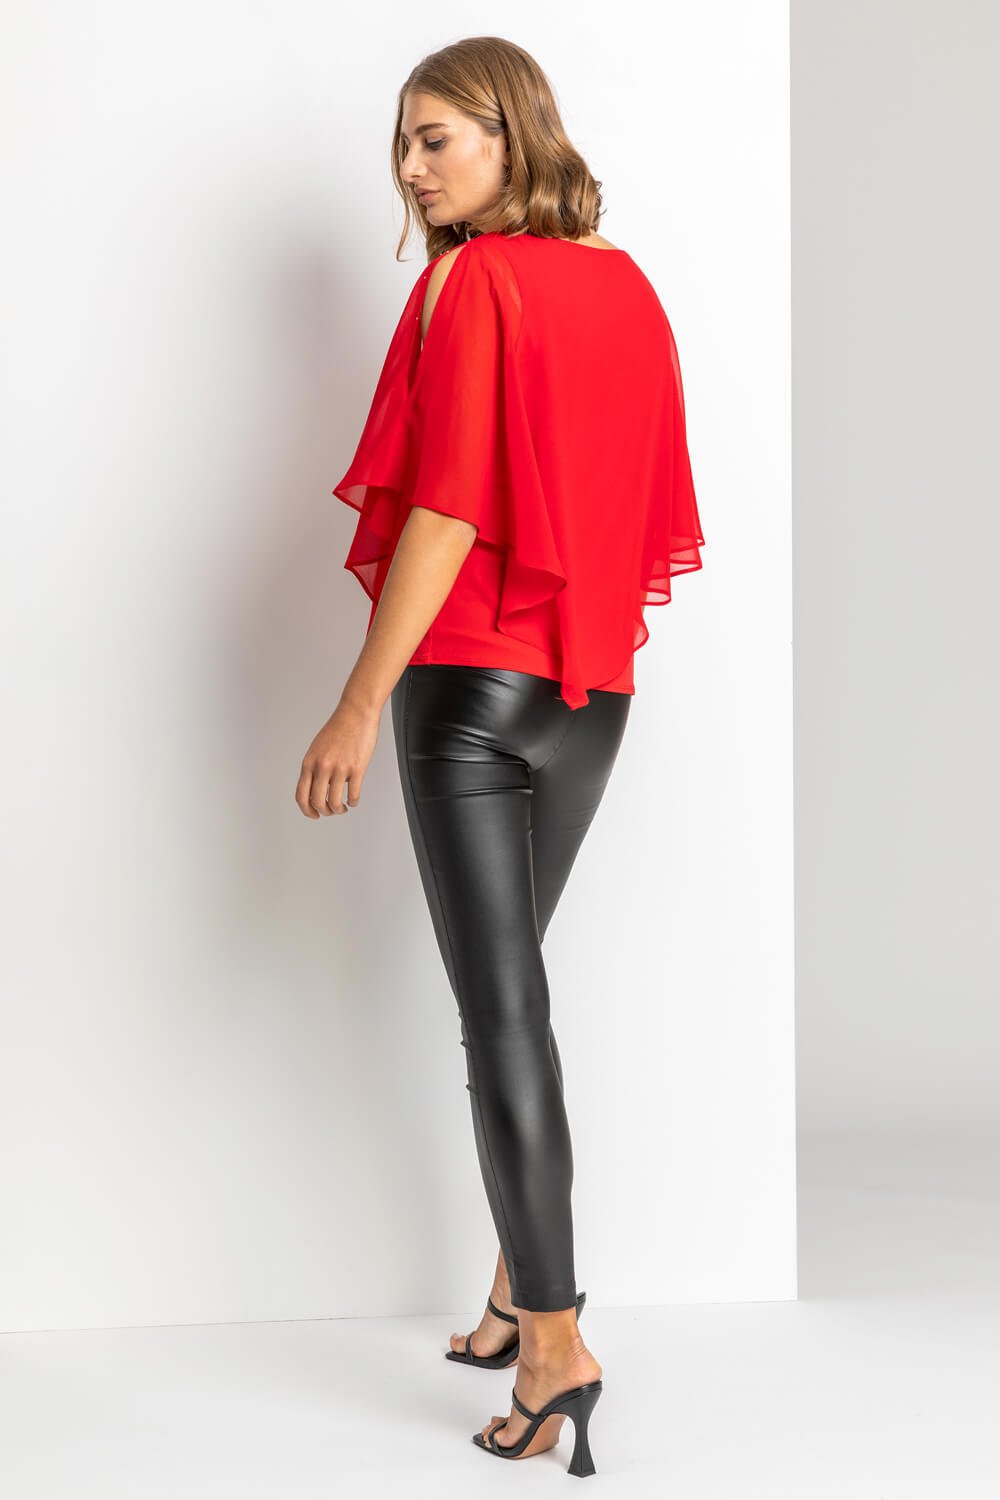 Red Embellished Chiffon Overlay Top, Image 2 of 5